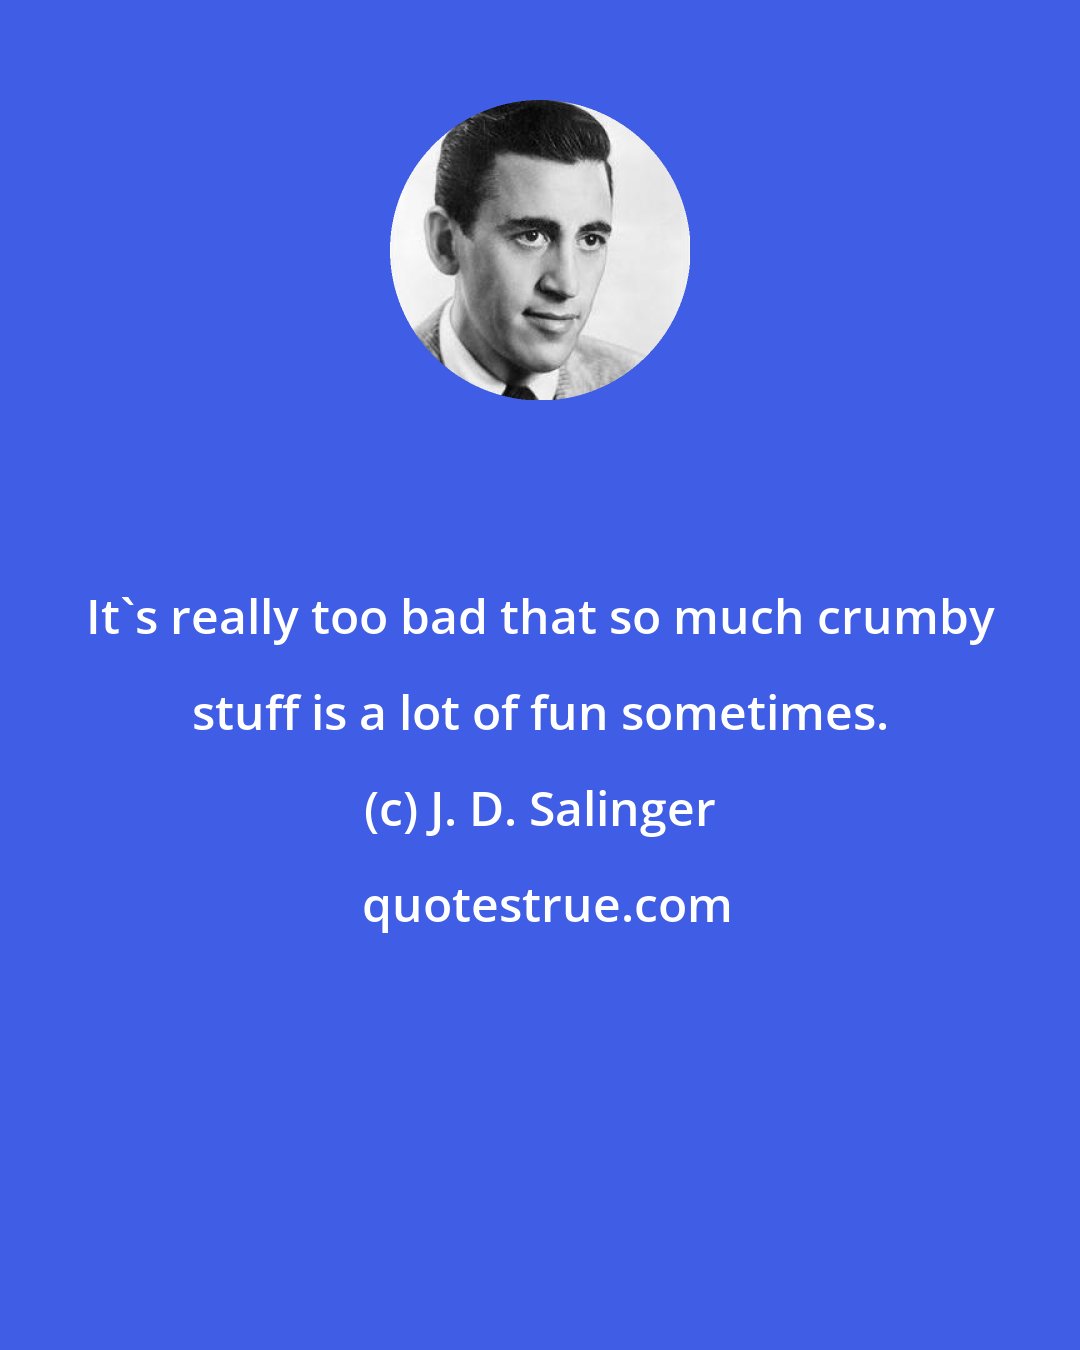 J. D. Salinger: It's really too bad that so much crumby stuff is a lot of fun sometimes.